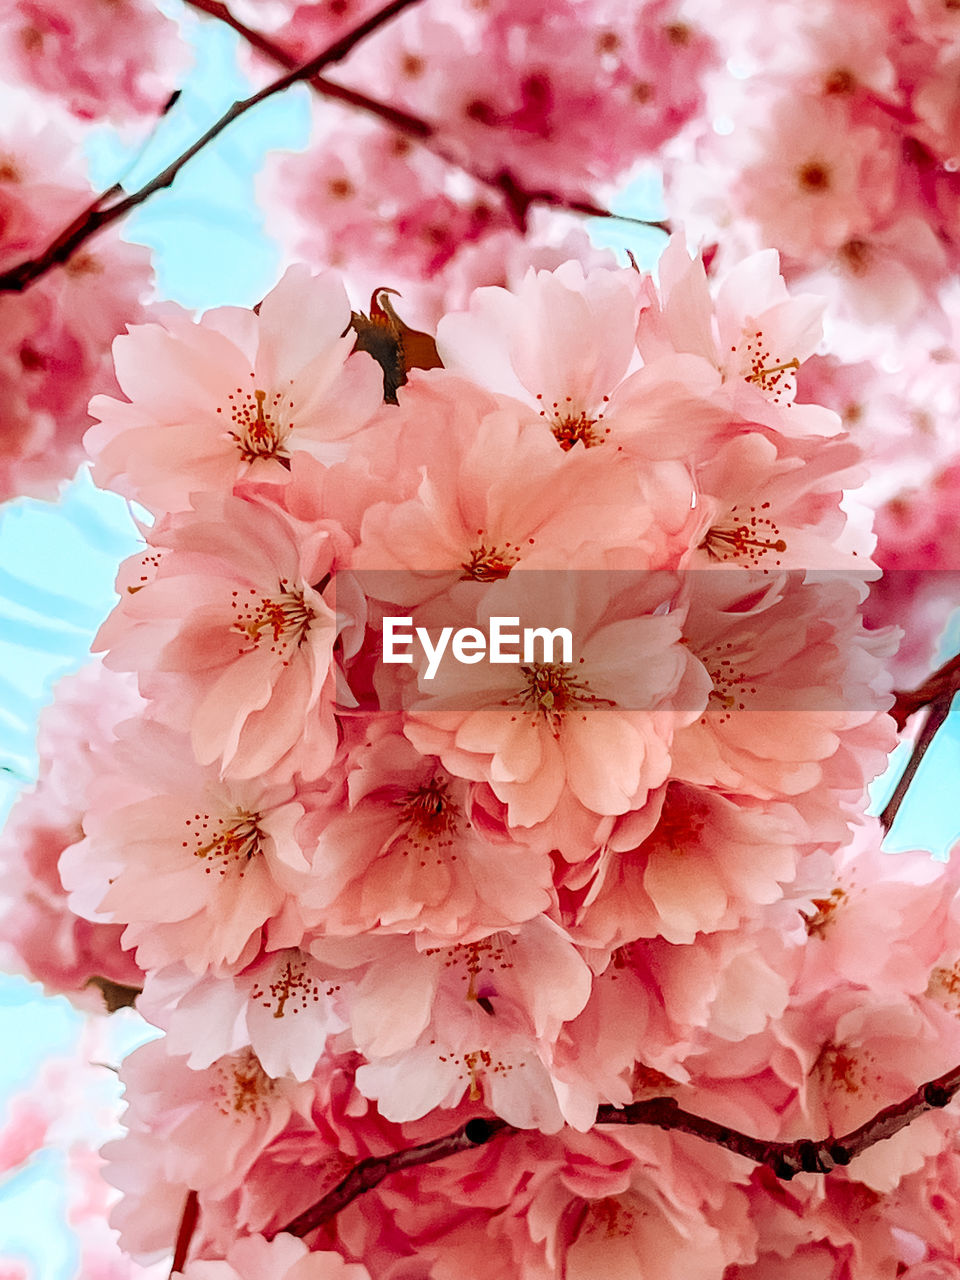 plant, flower, flowering plant, pink, fragility, beauty in nature, blossom, freshness, springtime, cherry, growth, cherry blossom, tree, nature, petal, branch, close-up, inflorescence, spring, no people, flower head, cherry tree, produce, outdoors, day, food, pollen, focus on foreground, botany, twig, plum blossom, stamen, orchard